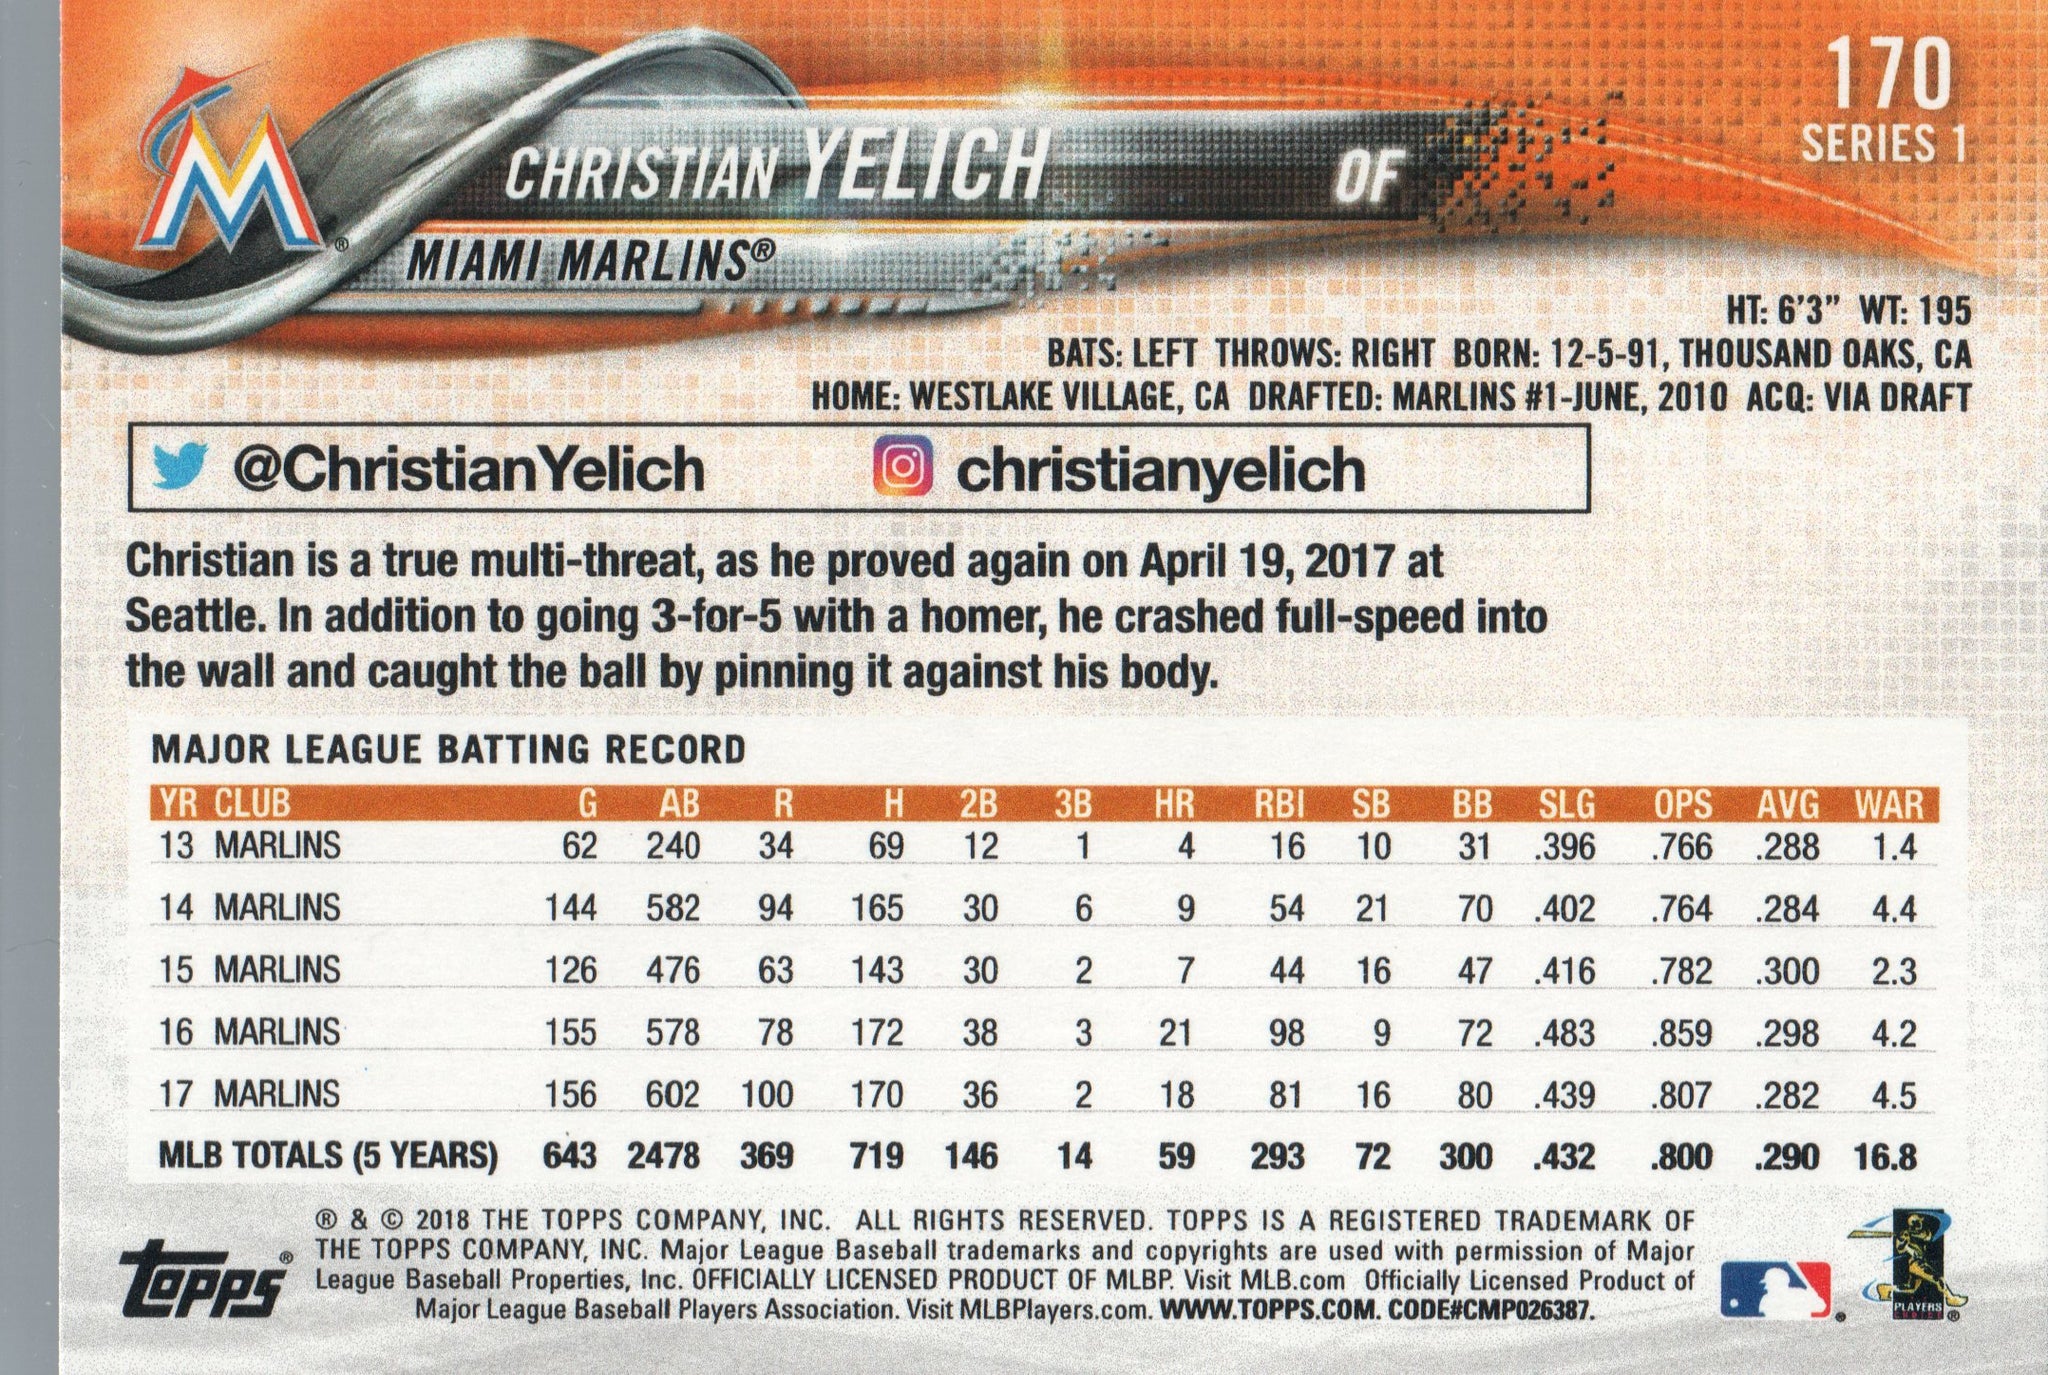  2018 Topps #170 Christian Yelich Miami Marlins